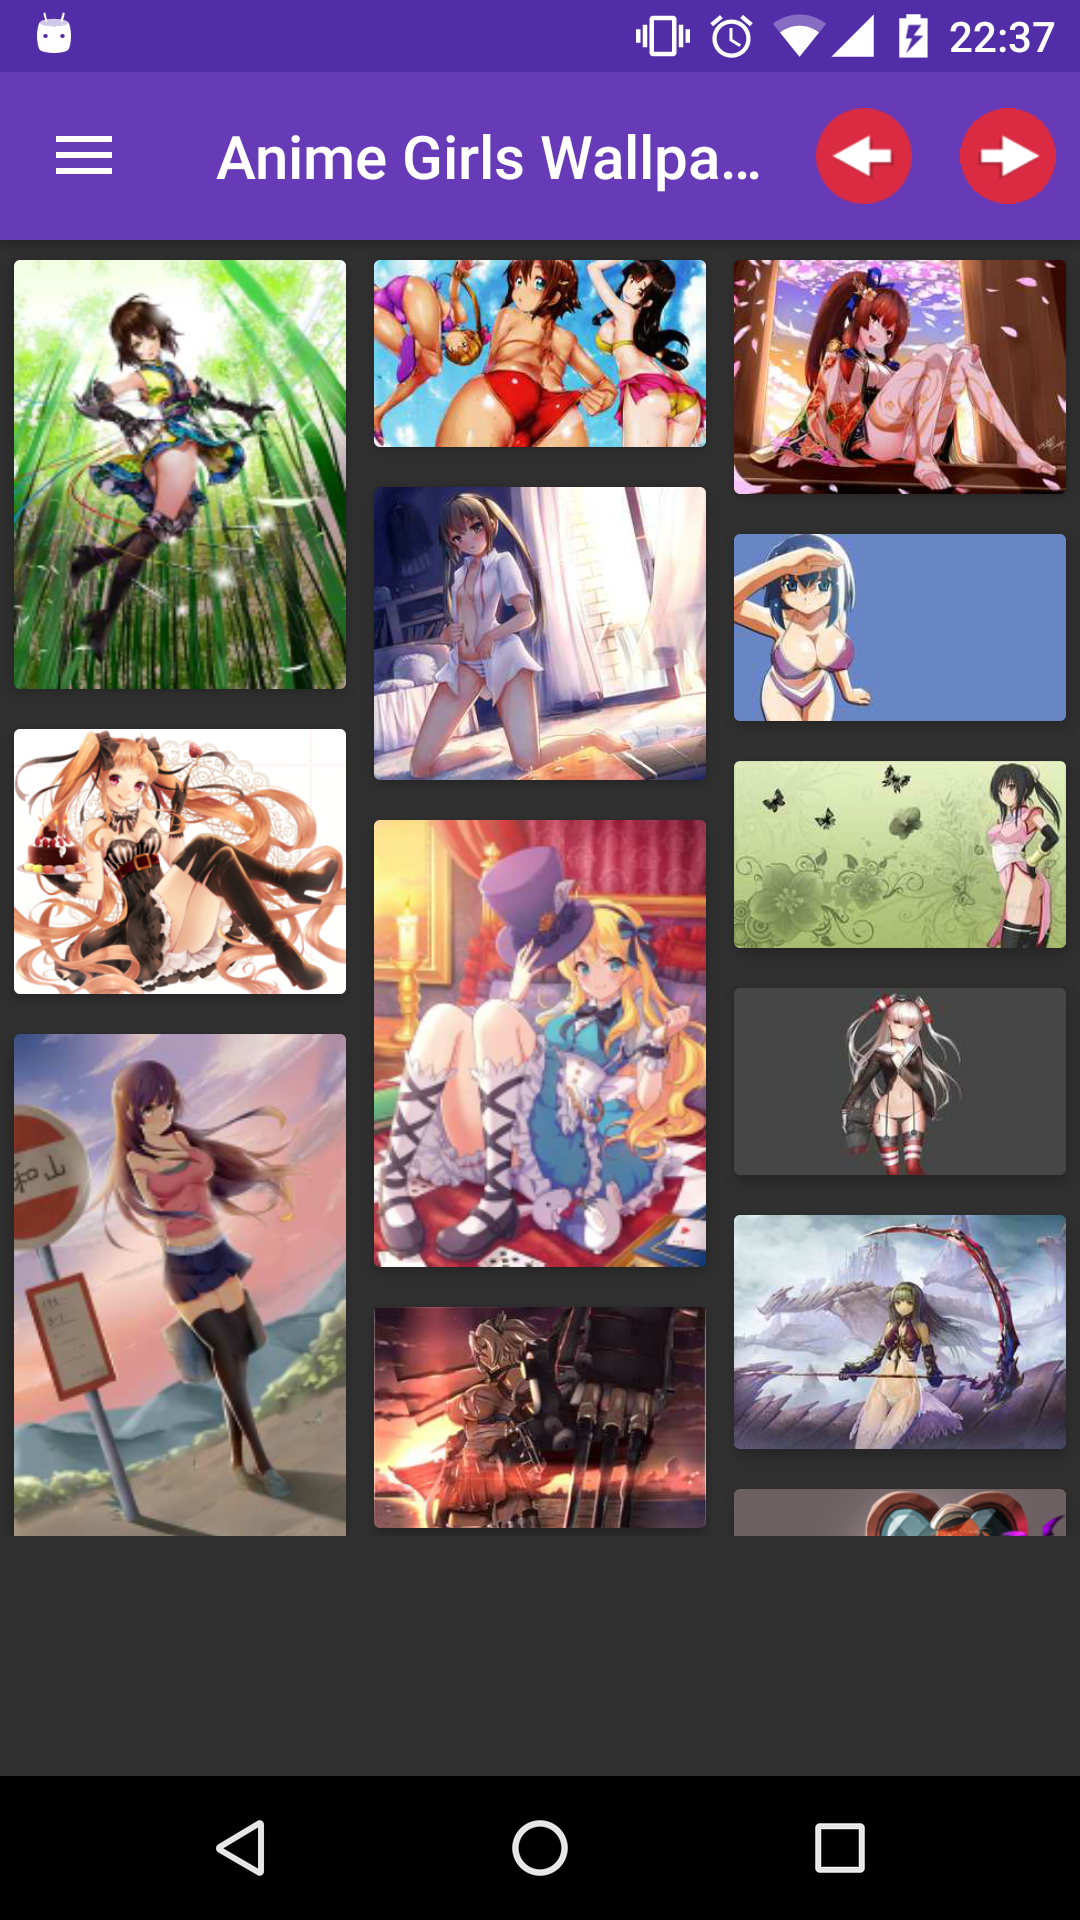 Anime Girls Backgrounds manga,backgrounds,anoko,downloads,picture,aplikasi,mainichi,download,porn,anime,wallpaper,best,wallpapers,sexy,girls,apk,pic,hentai,android,hot,shemales,app,collection,pornstar,images,series